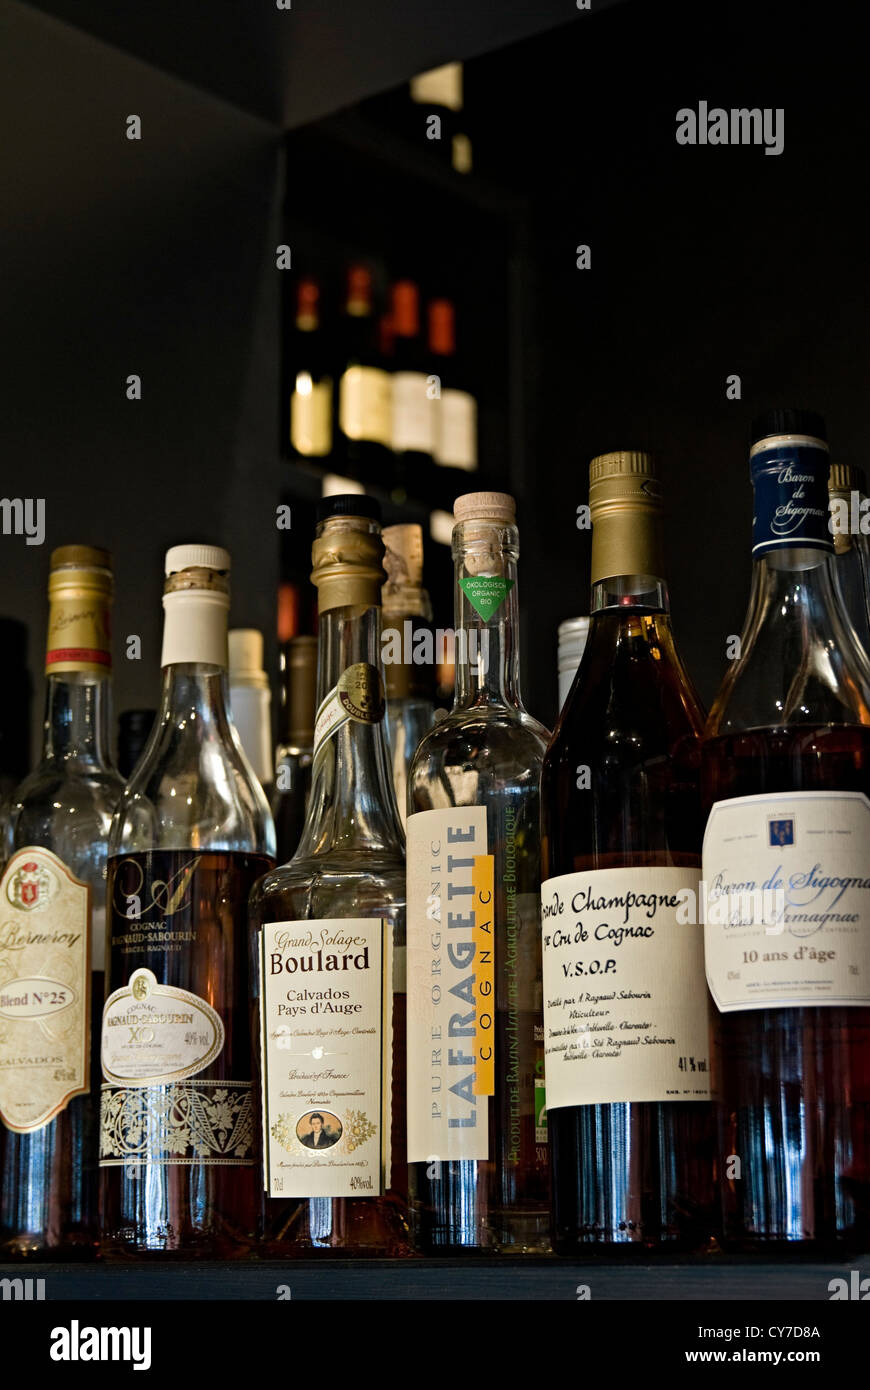 Cognac bottles lined upon a shelf ready for serving in a restaurant Stock Photo